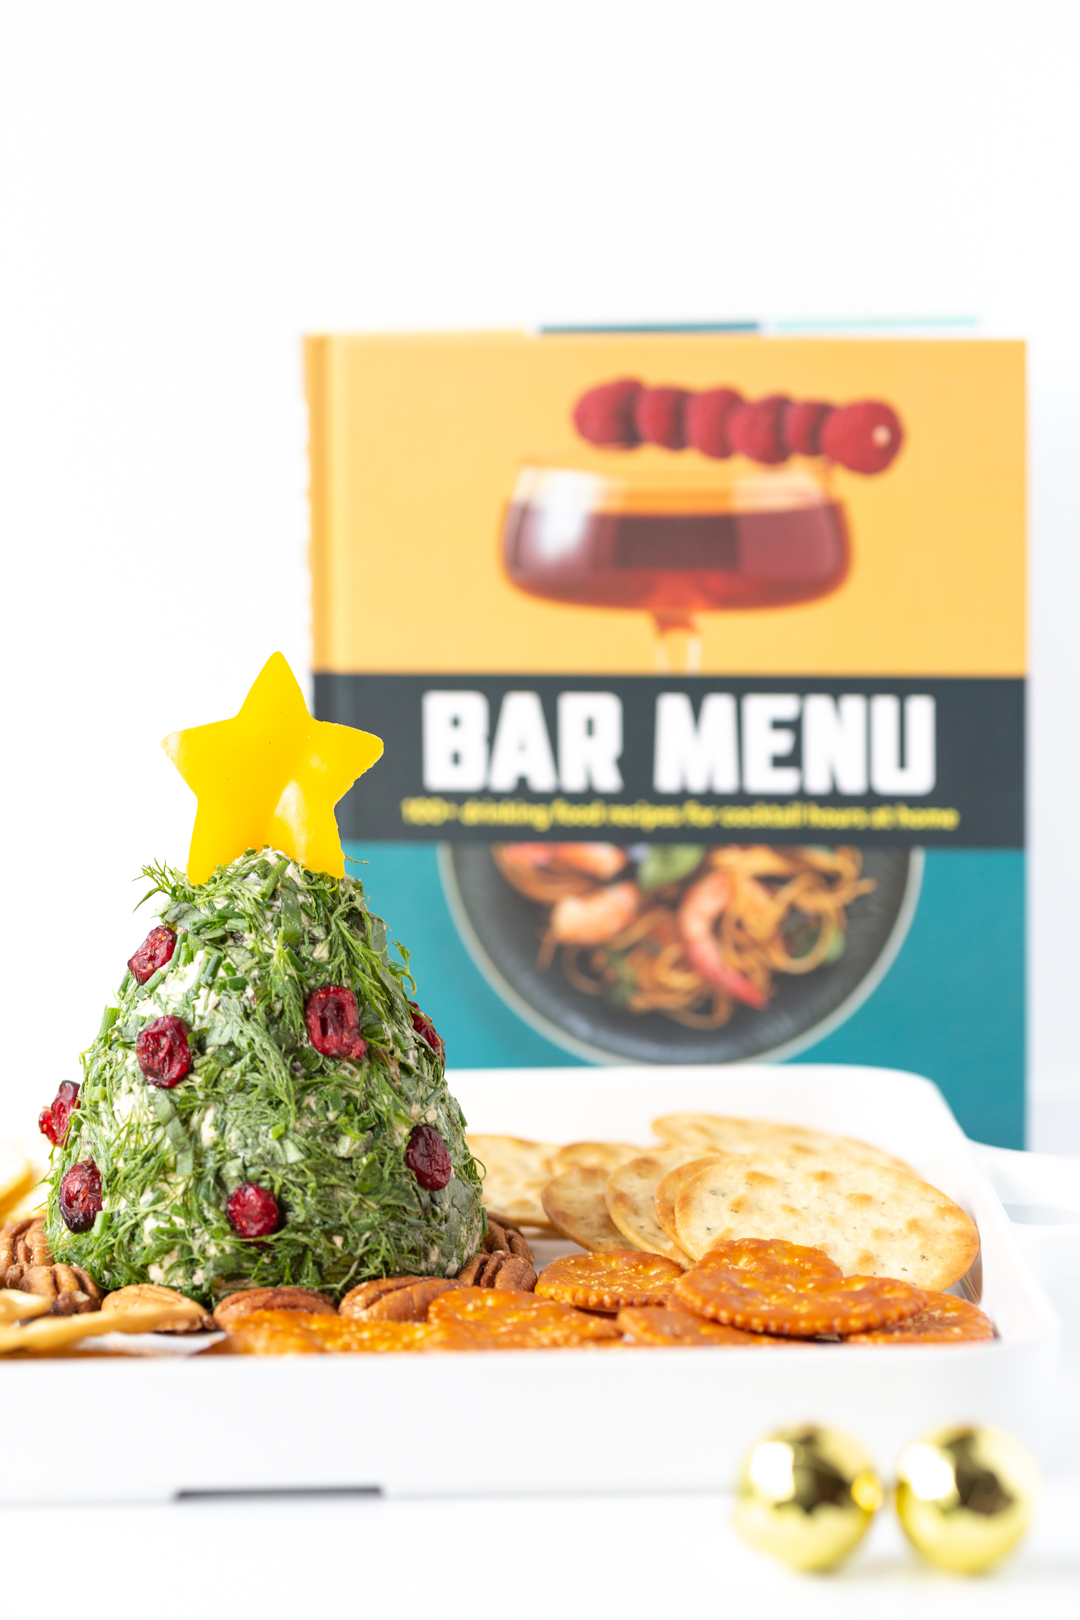 bar menu recipe book and cheese ball shaped like a christmas tree in forefront 